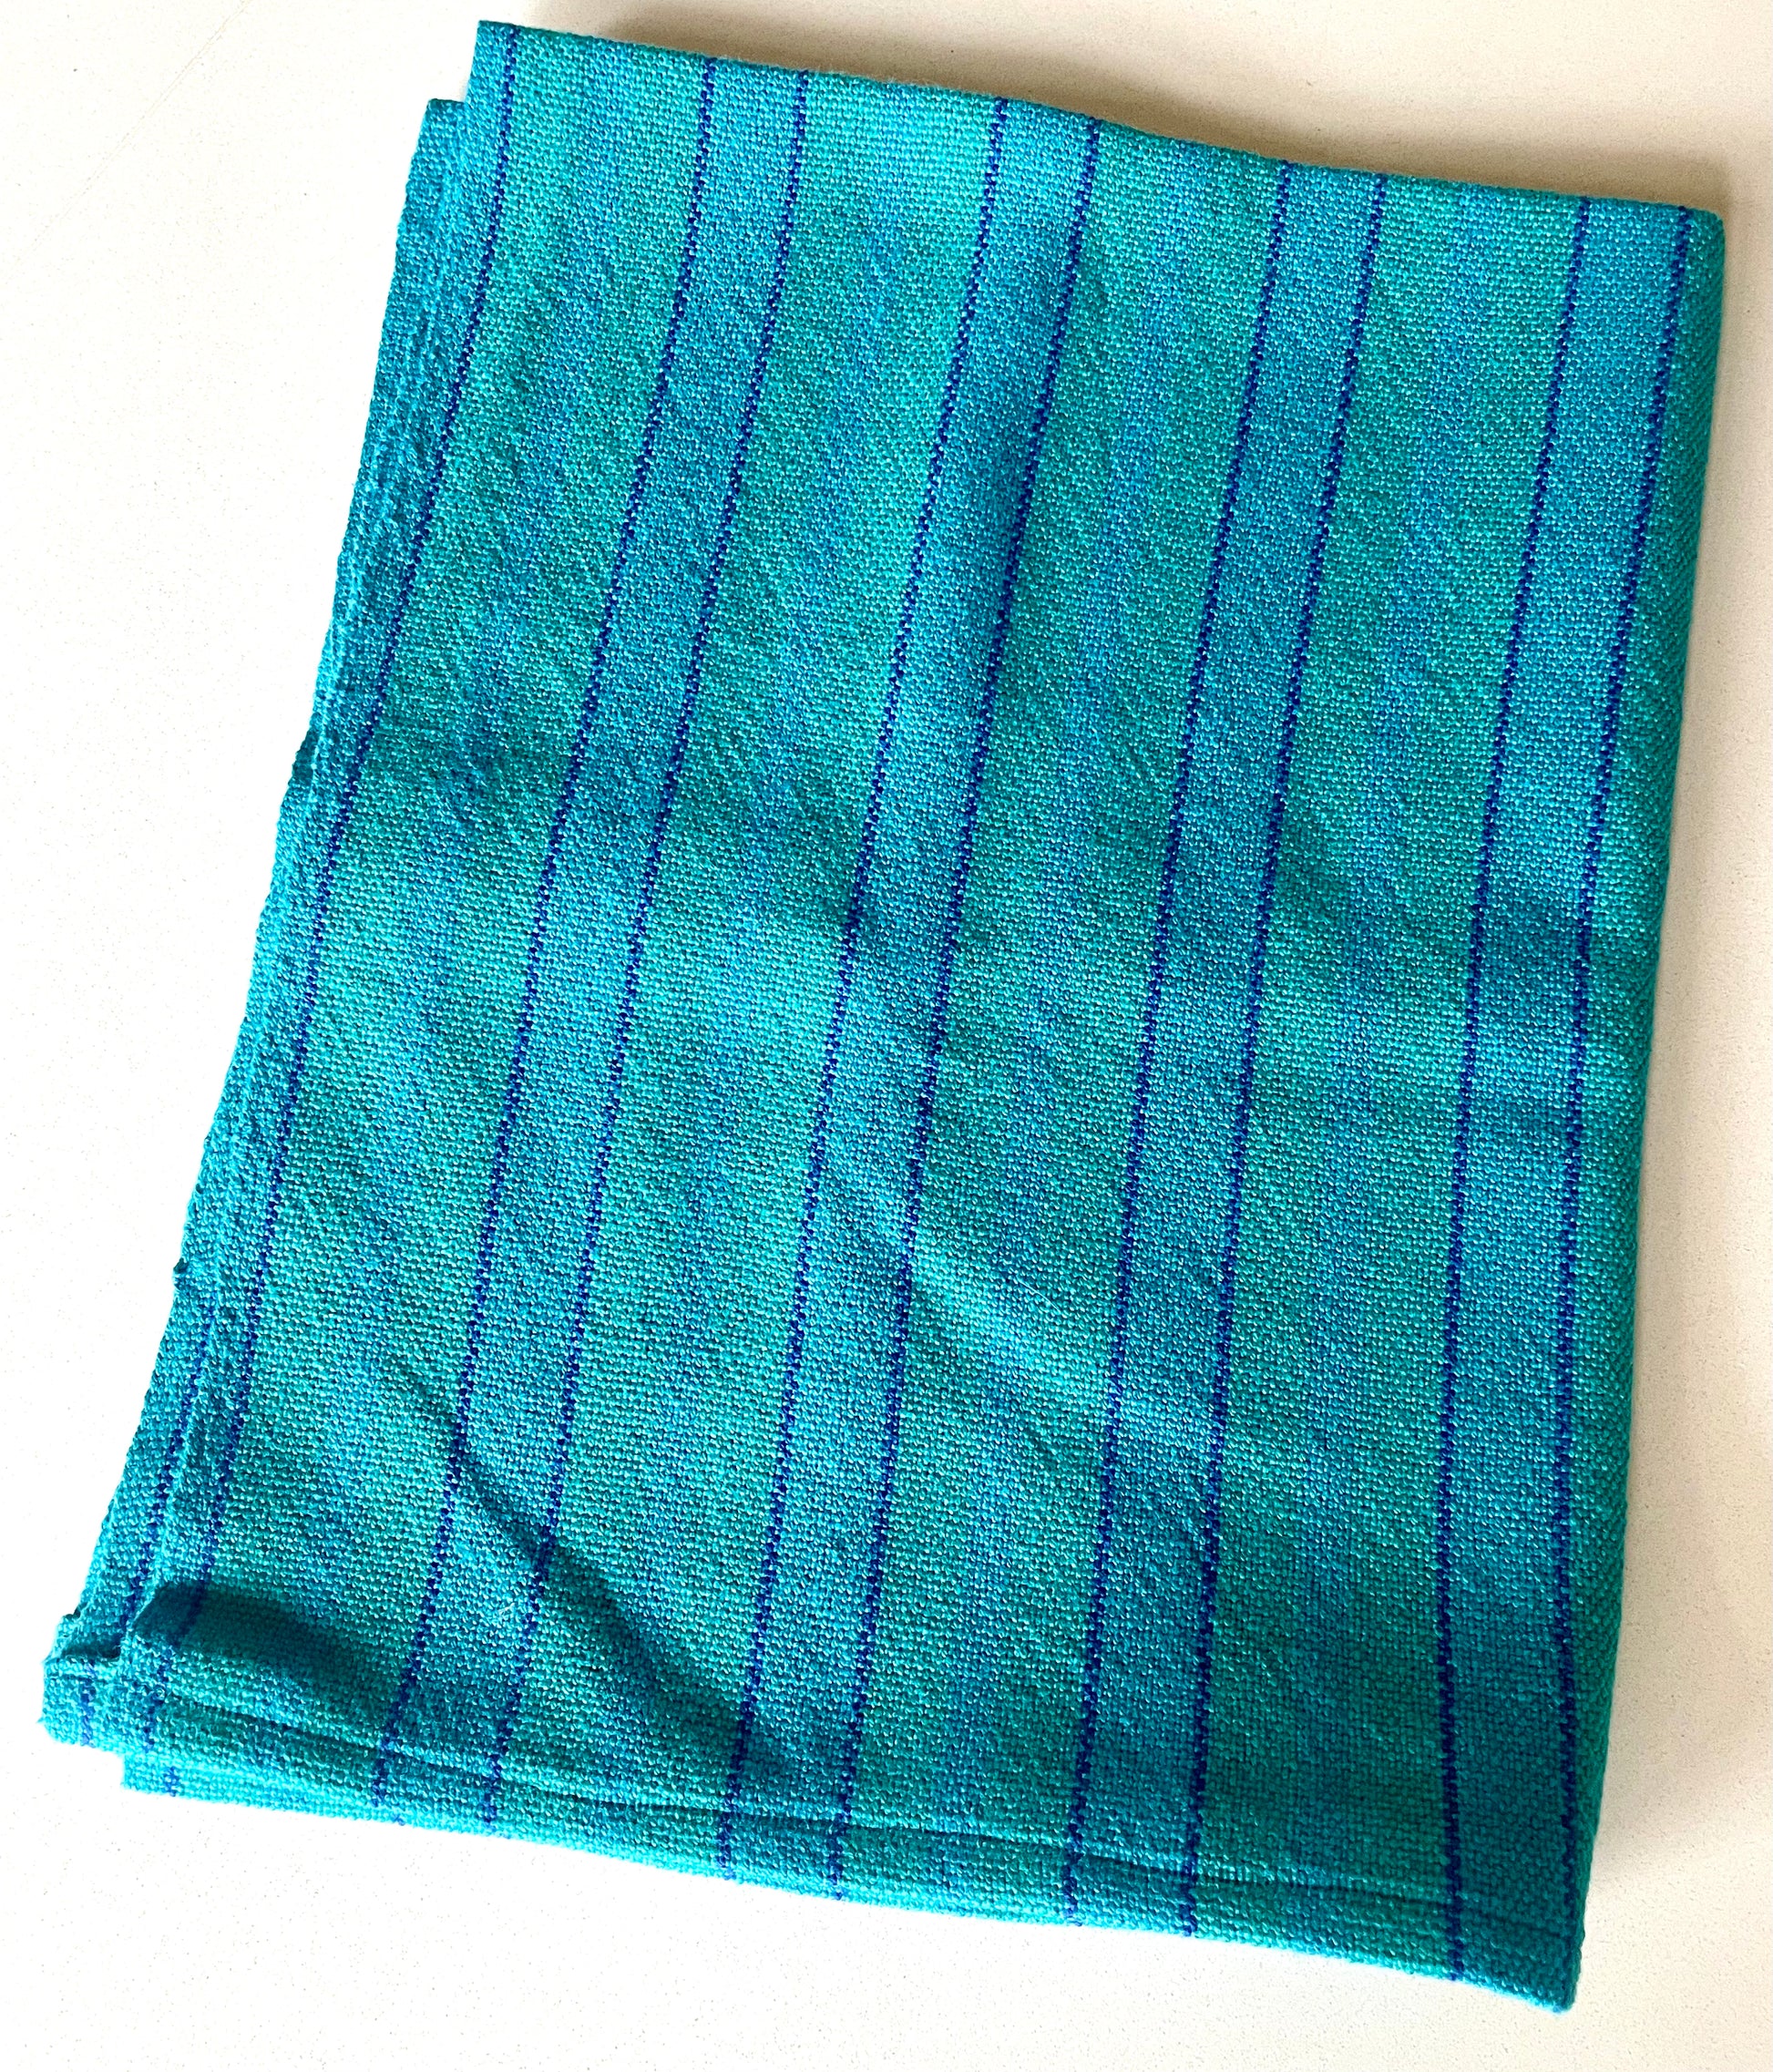 teal and blue towel